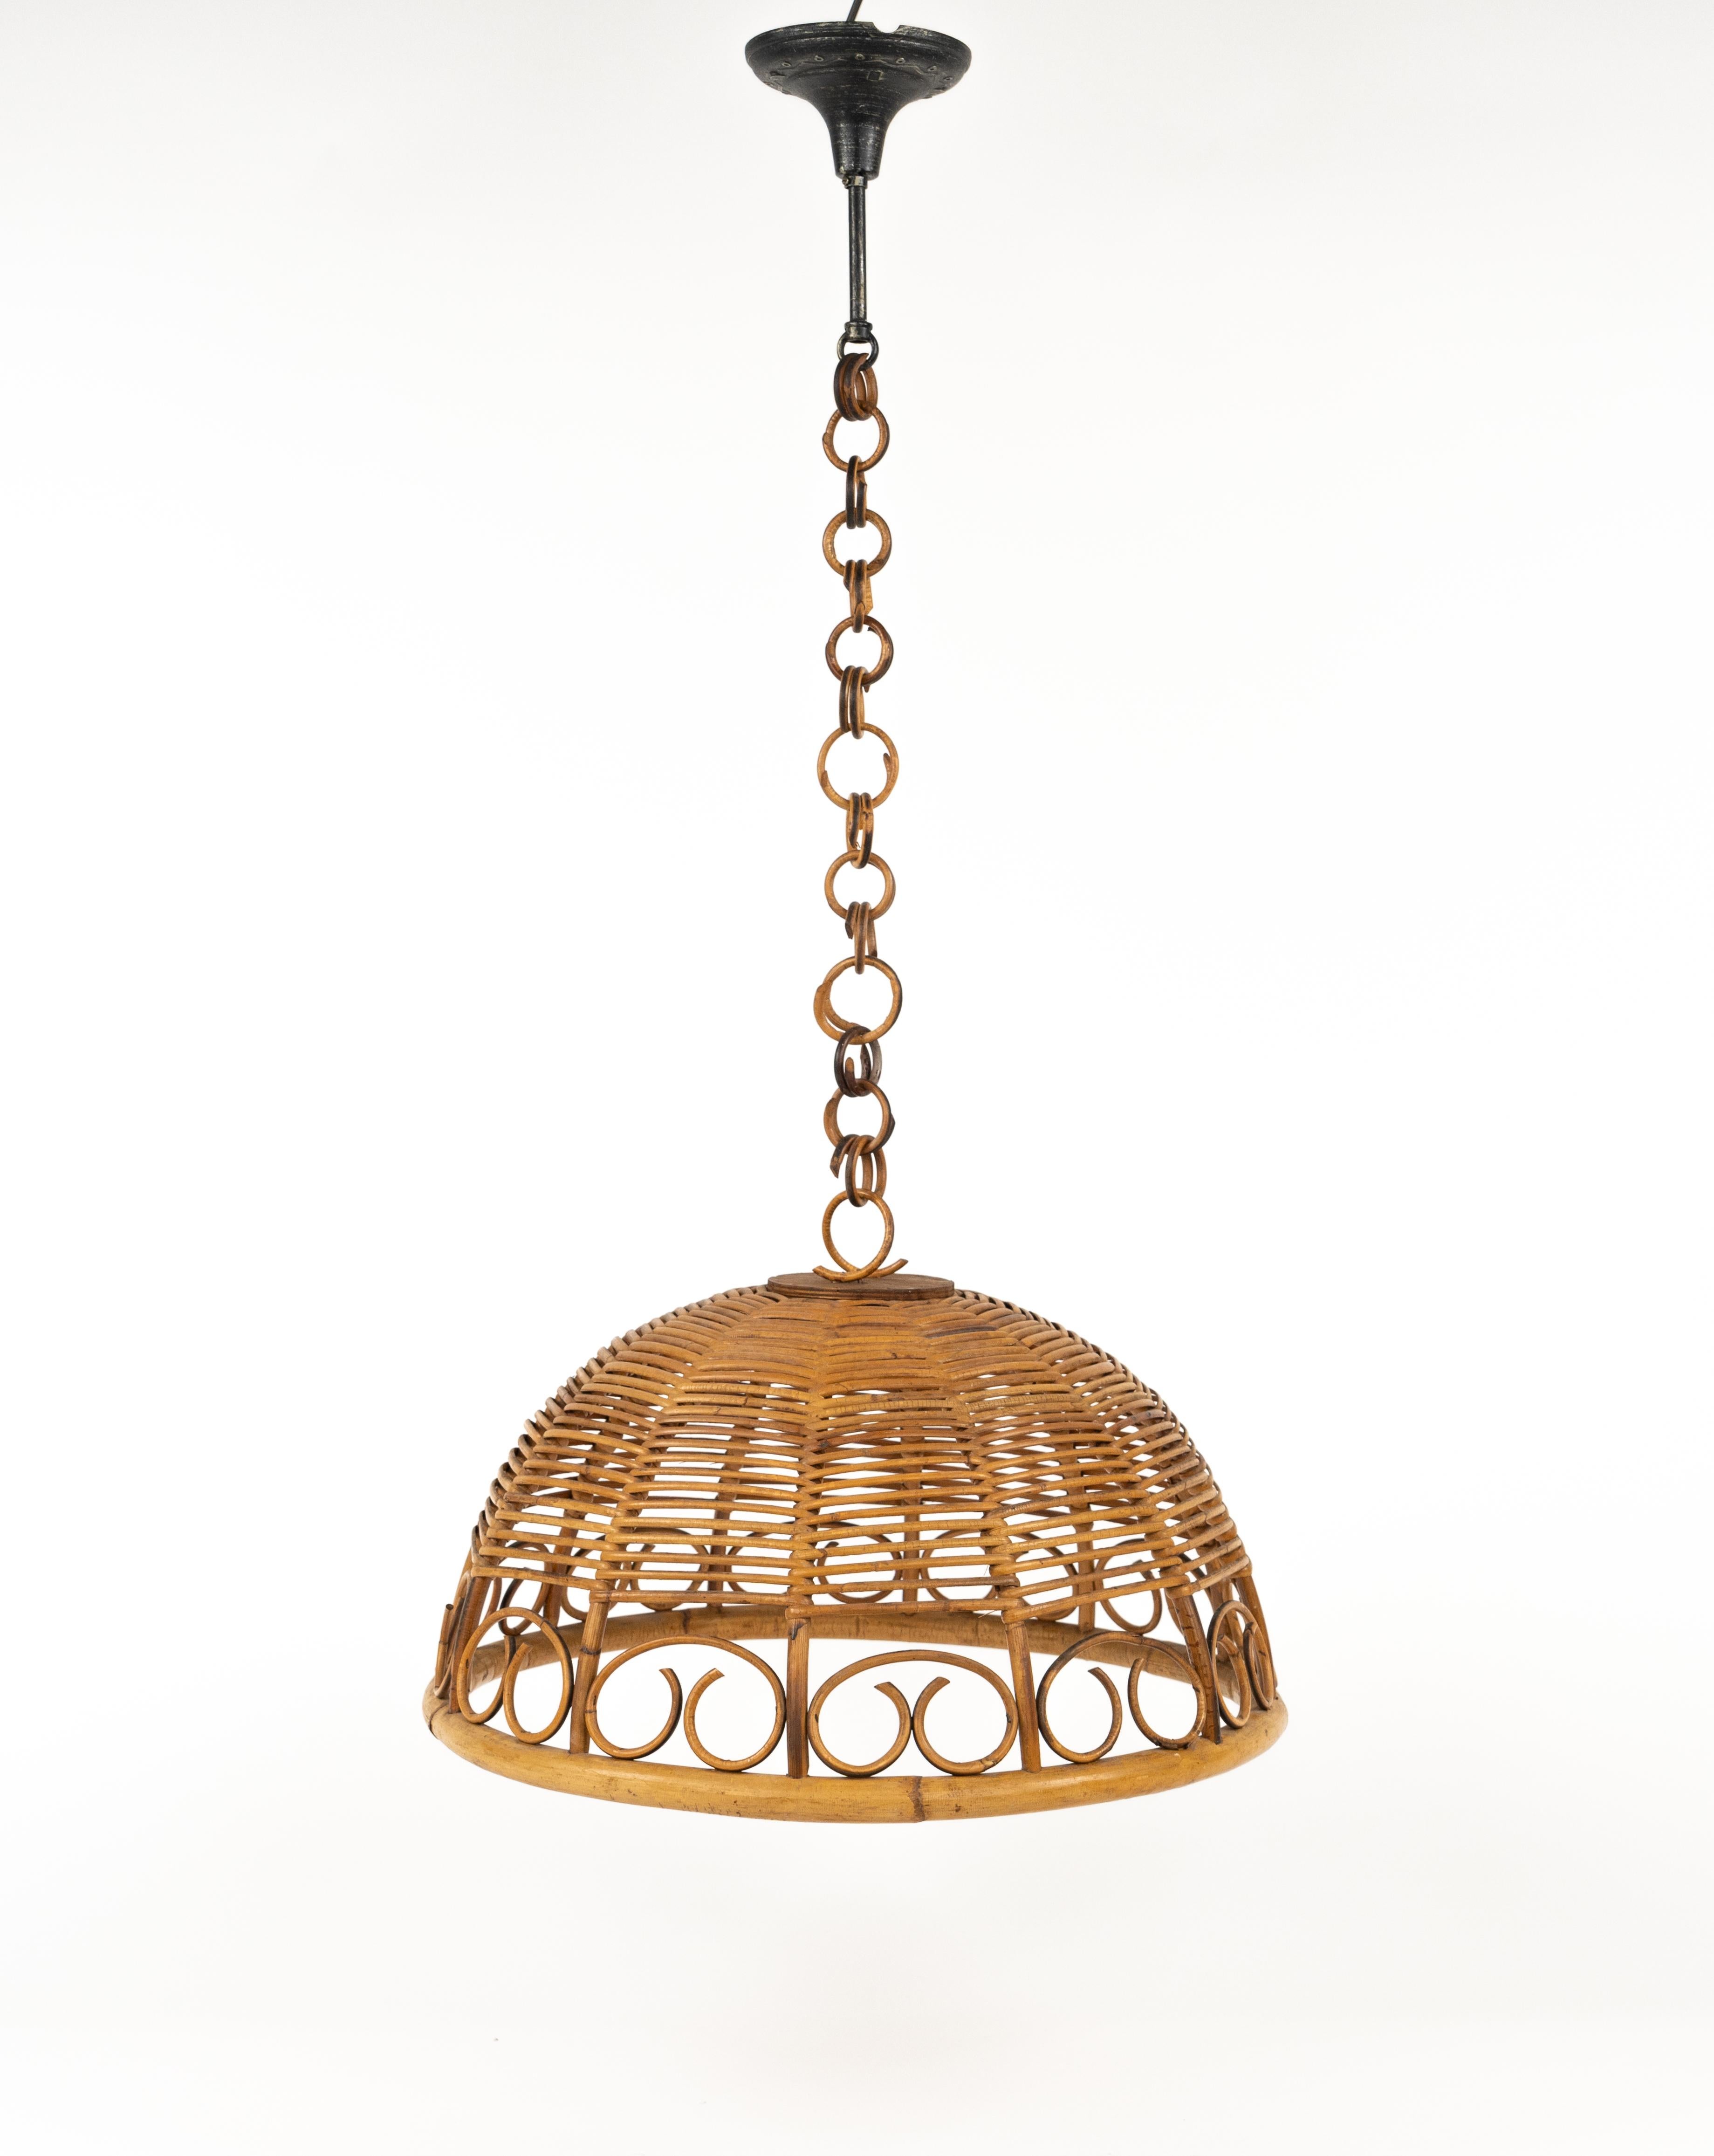 Italian Midcentury Rattan and Bamboo Chandelier Pendant, Italy 1960s For Sale